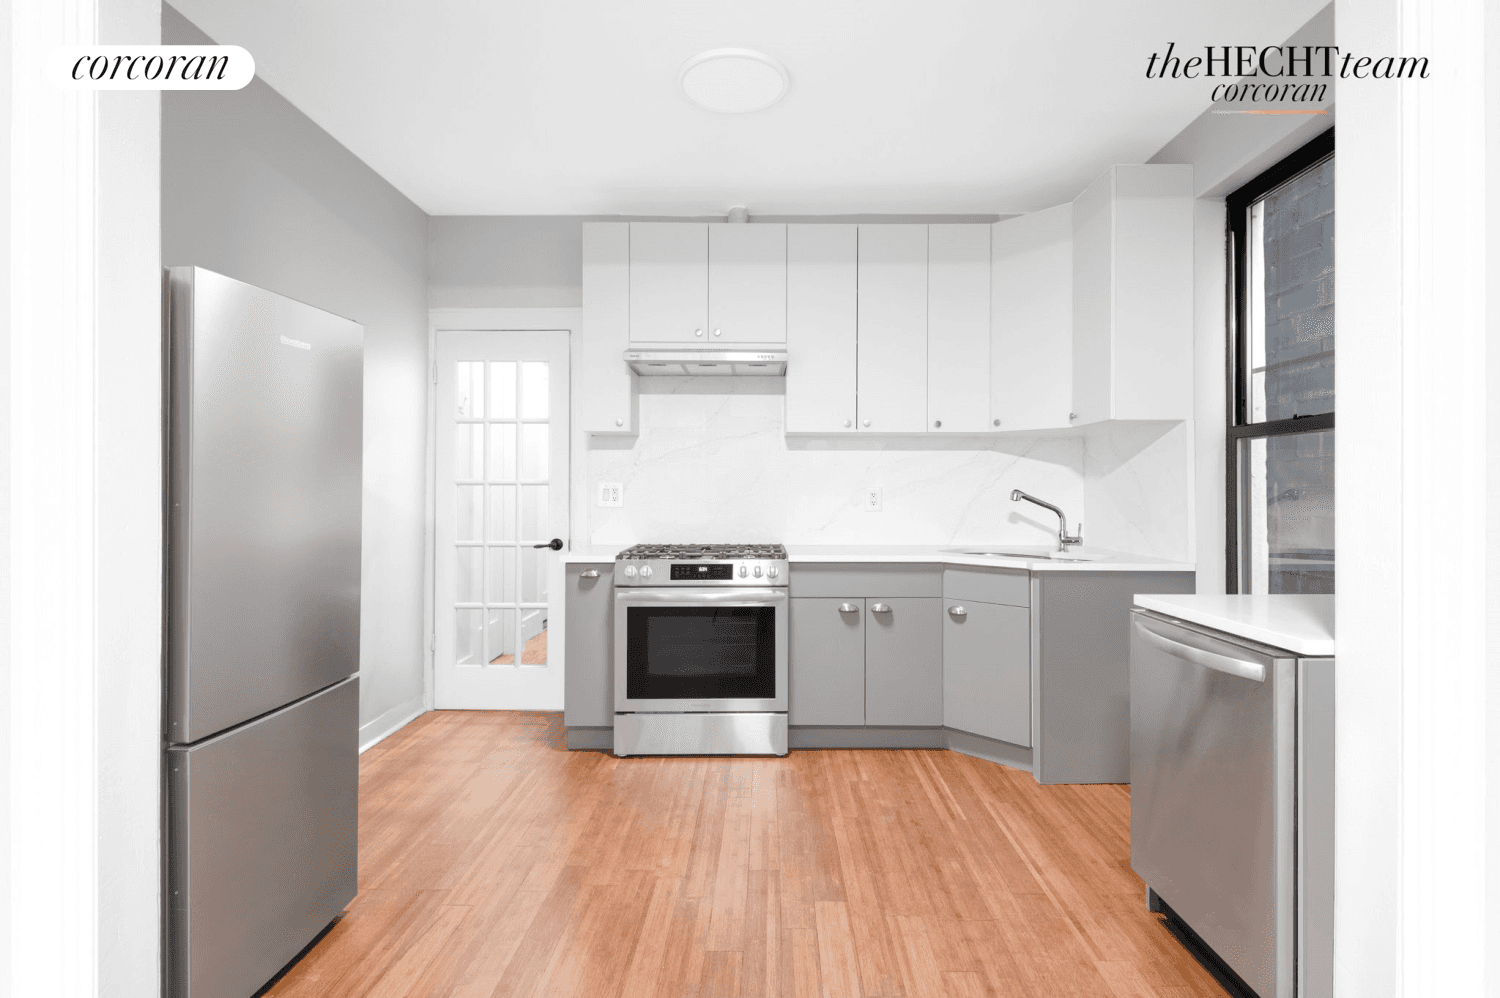 Welcome to 521 Eastern Parkway 3, a fully renovated first floor apartment boasting 3 bedrooms and 2 full bathrooms.